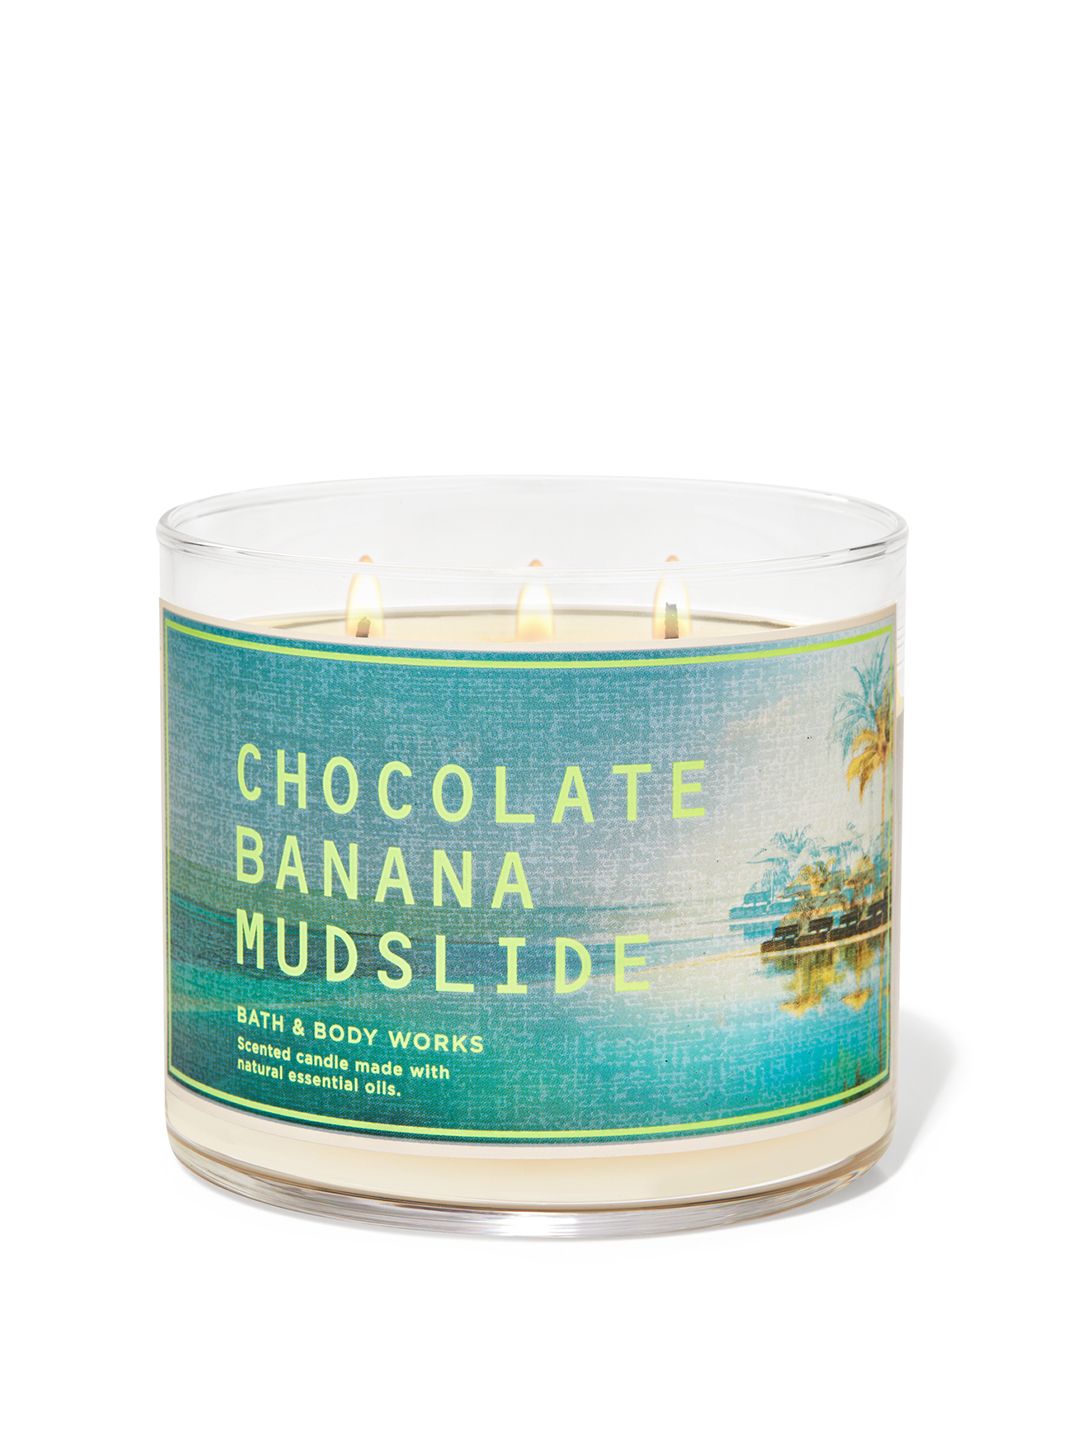 Bath & Body Works Chocolate Banana Mudslide 3-Wick Scented Candle - 411g Price in India